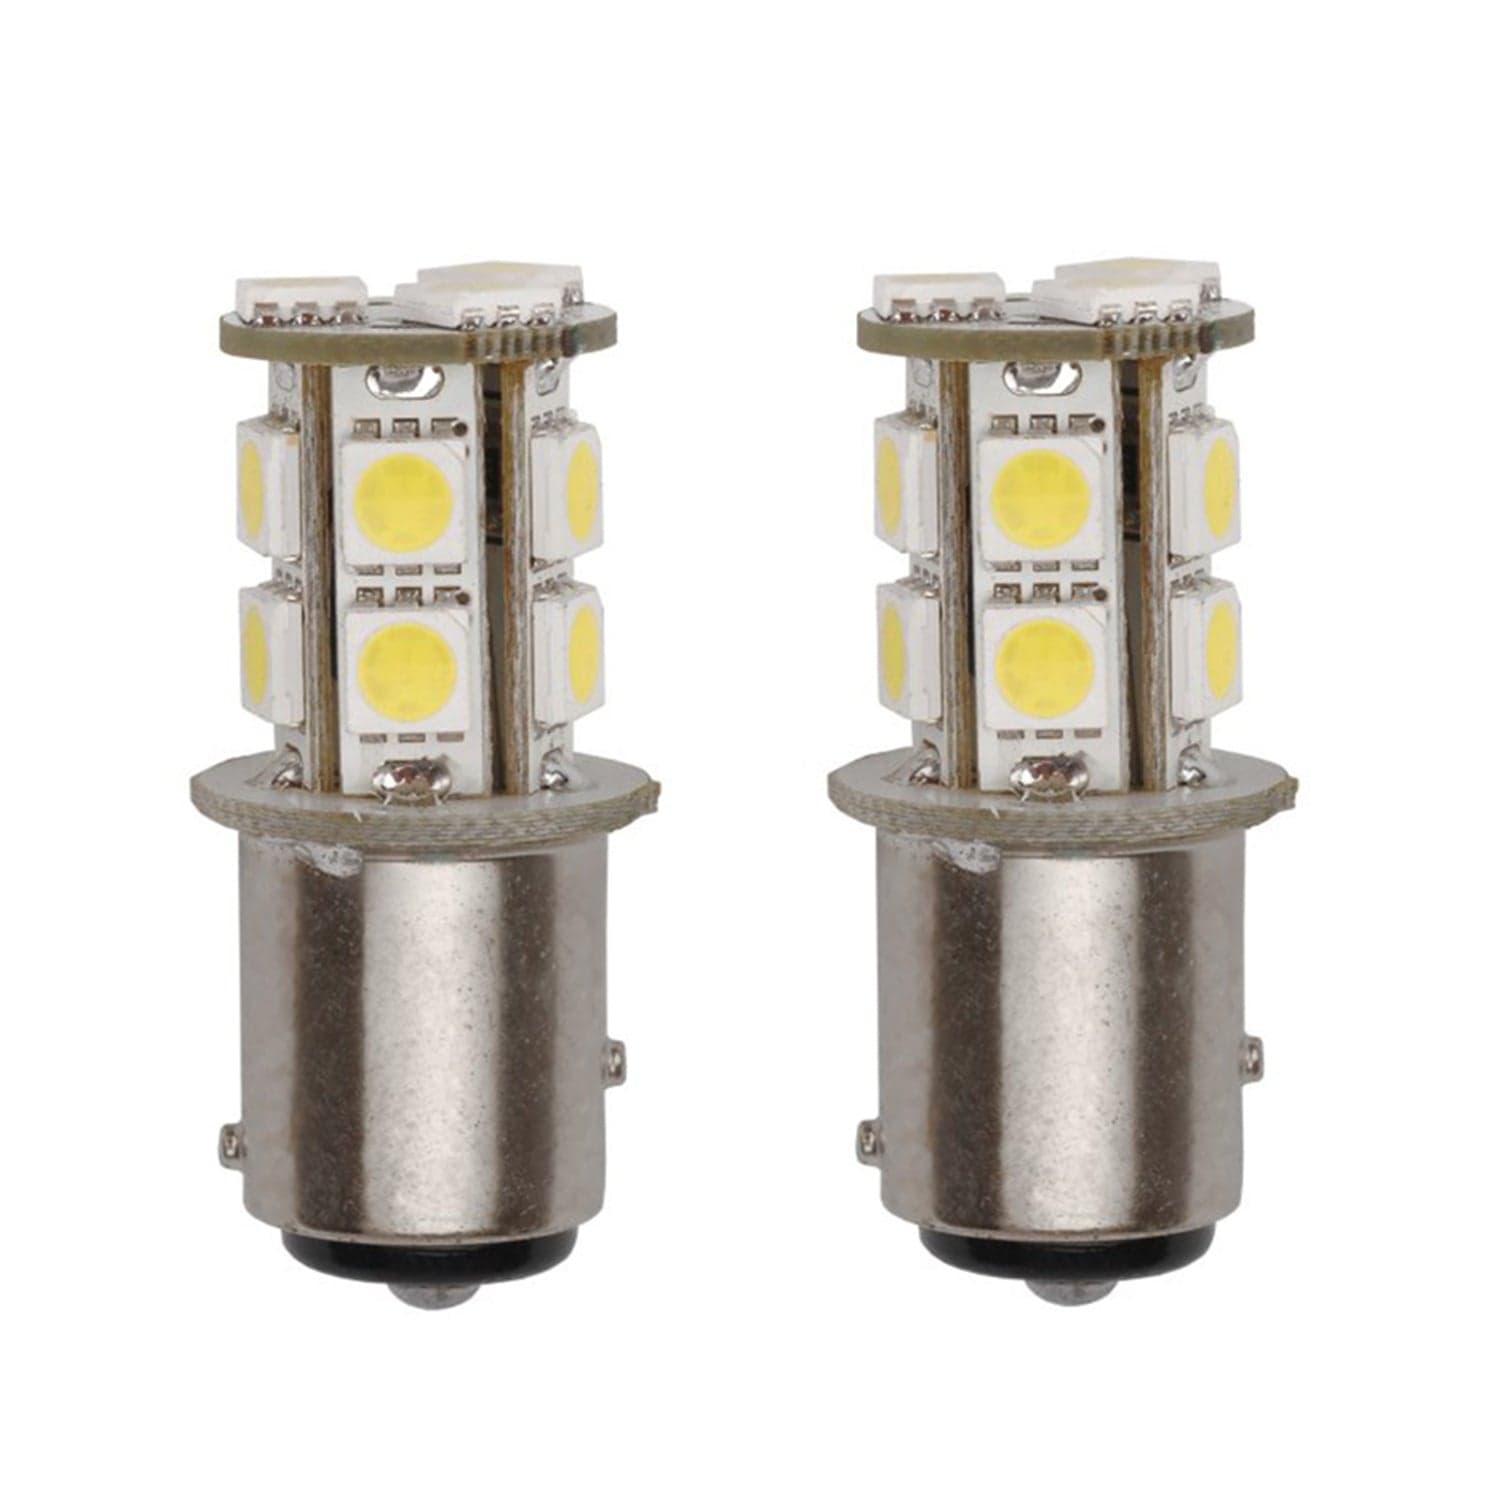 AP Products 016-1157-170 12 Volt Replacement Dual Circuit 1157 LED Light Bulb – 2 pack